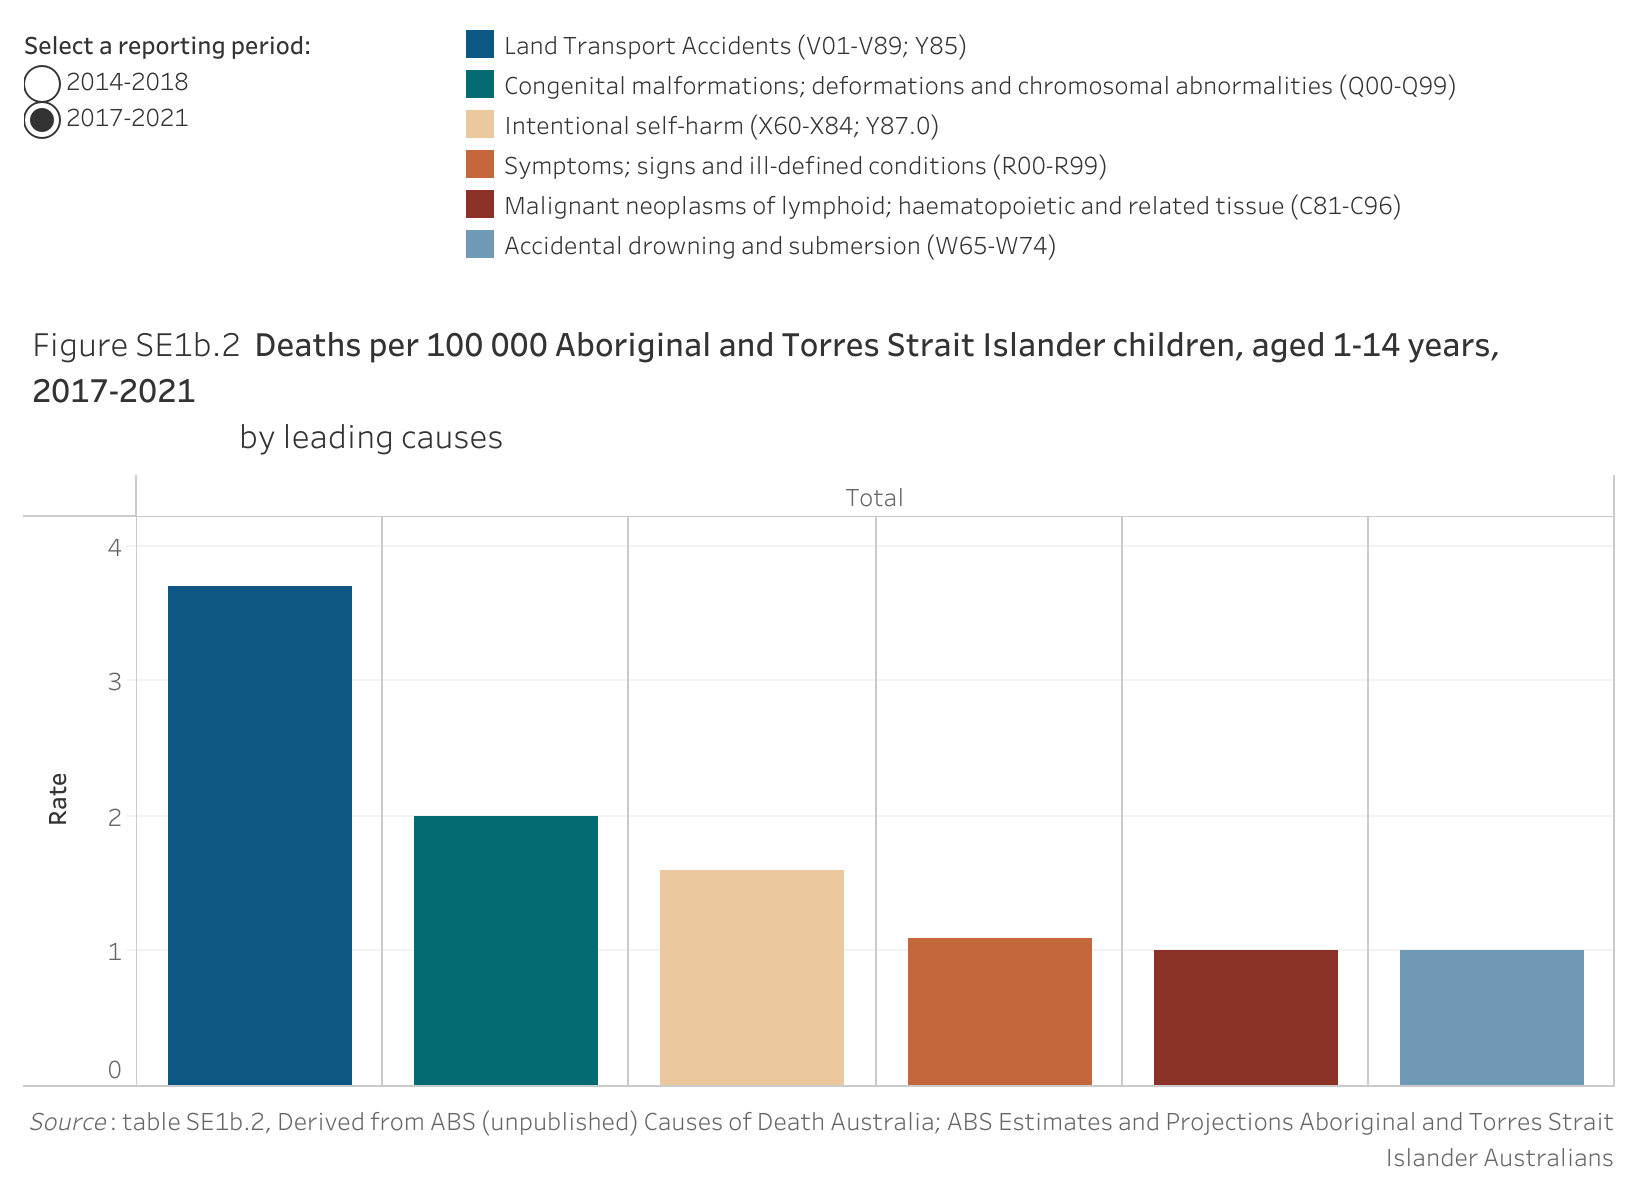 Figure SE1b.2 shows the deaths per 100 000 Aboriginal and Torres Strait Islander children, aged 1-14 years, 2017-2021, by leading causes. More details can be found within the text near this image.